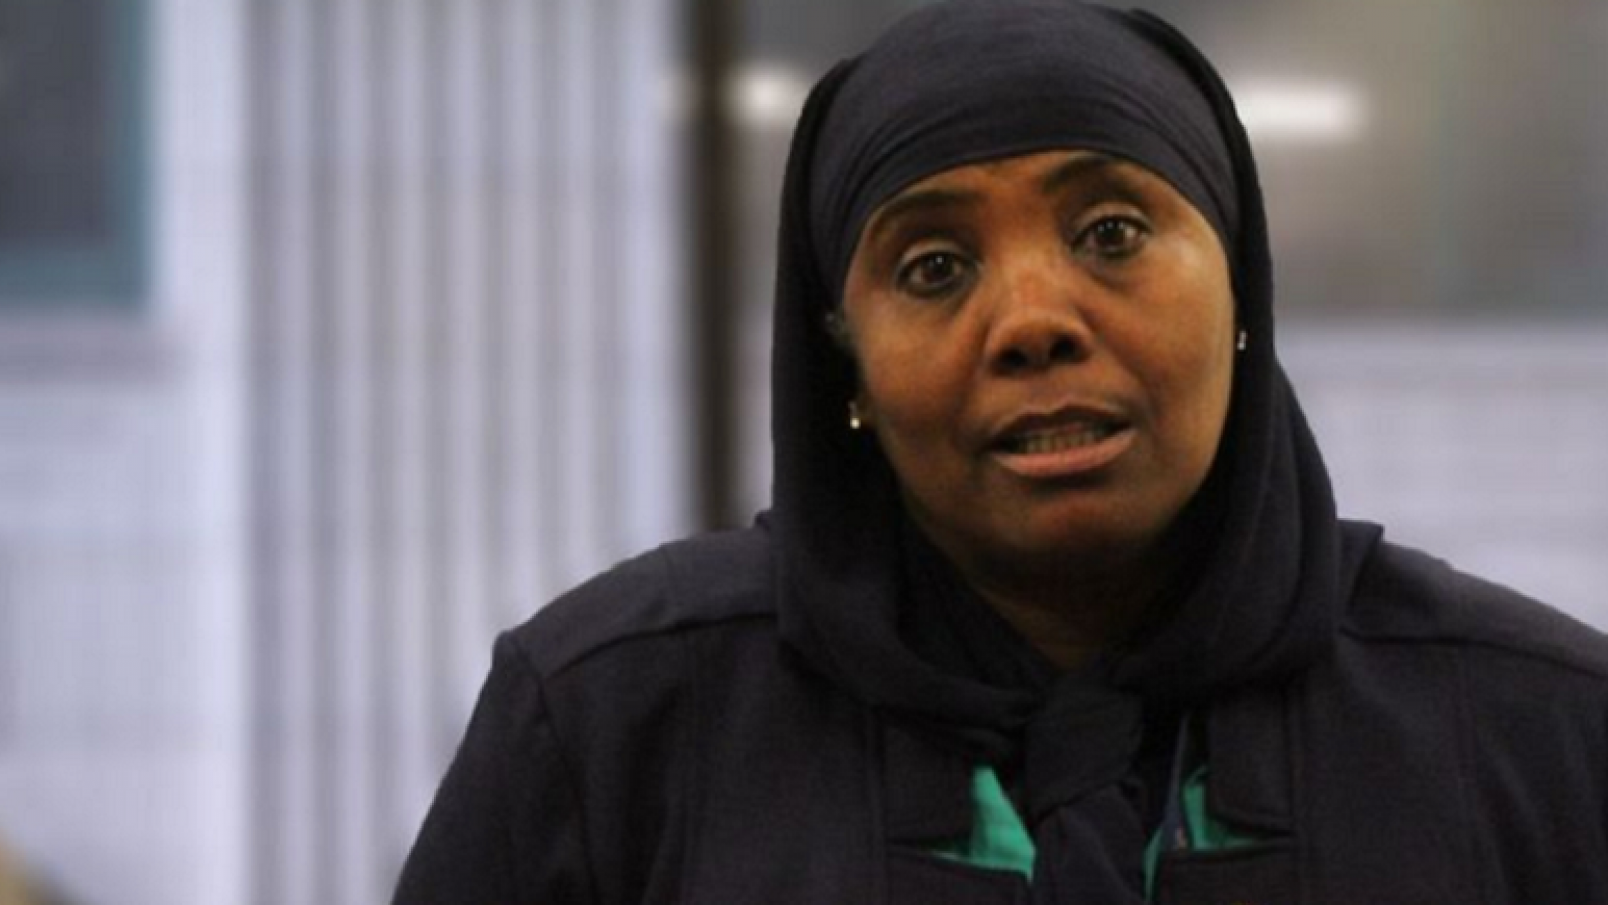 Muslim Democrat Representative “Highly Offended” By Prayer In Pennsylvania State Assembly